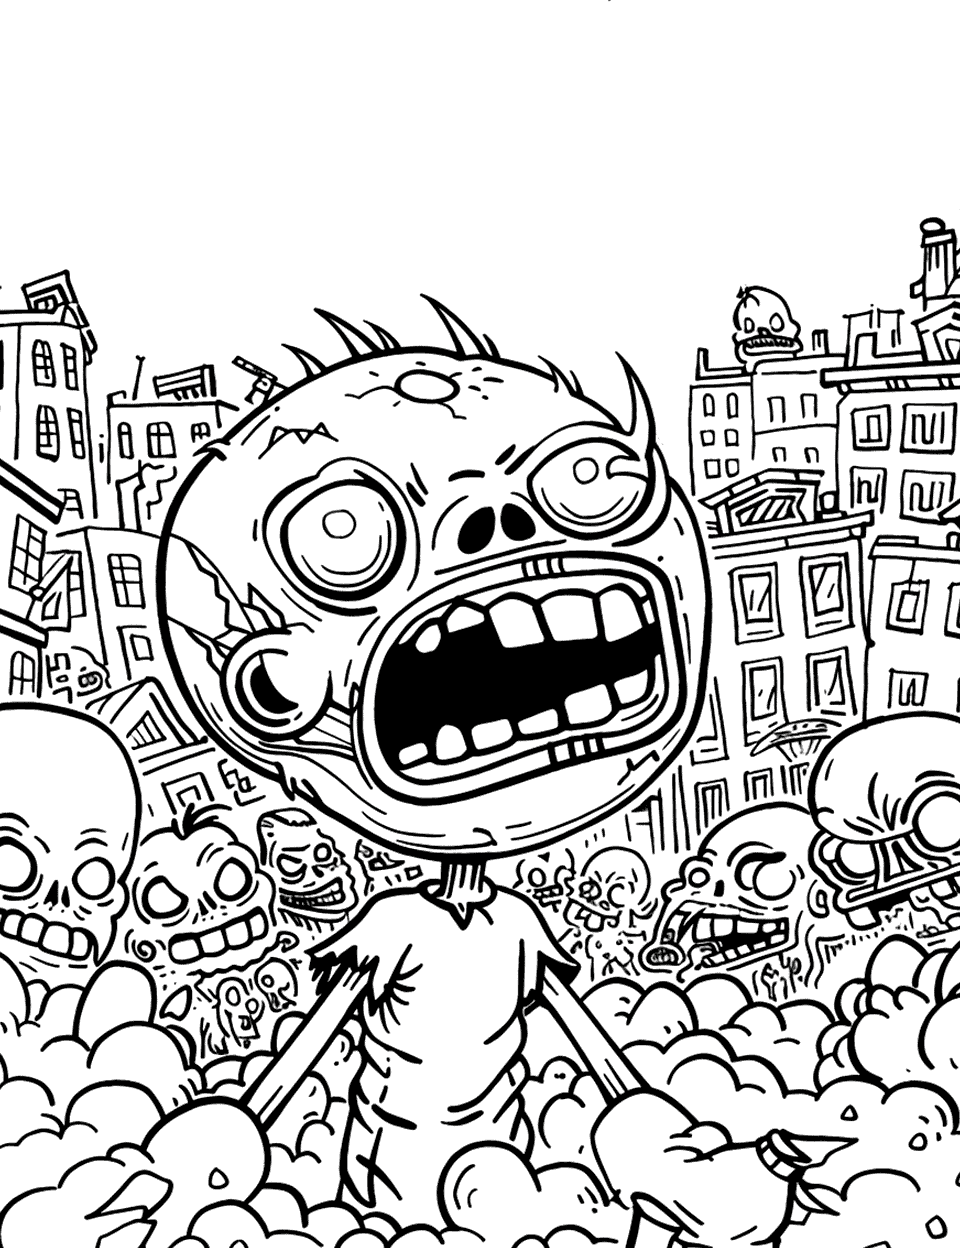 Undead Horde Invasion Zombie Coloring Page - A horde of undead zombies moving through a crumbling cityscape.